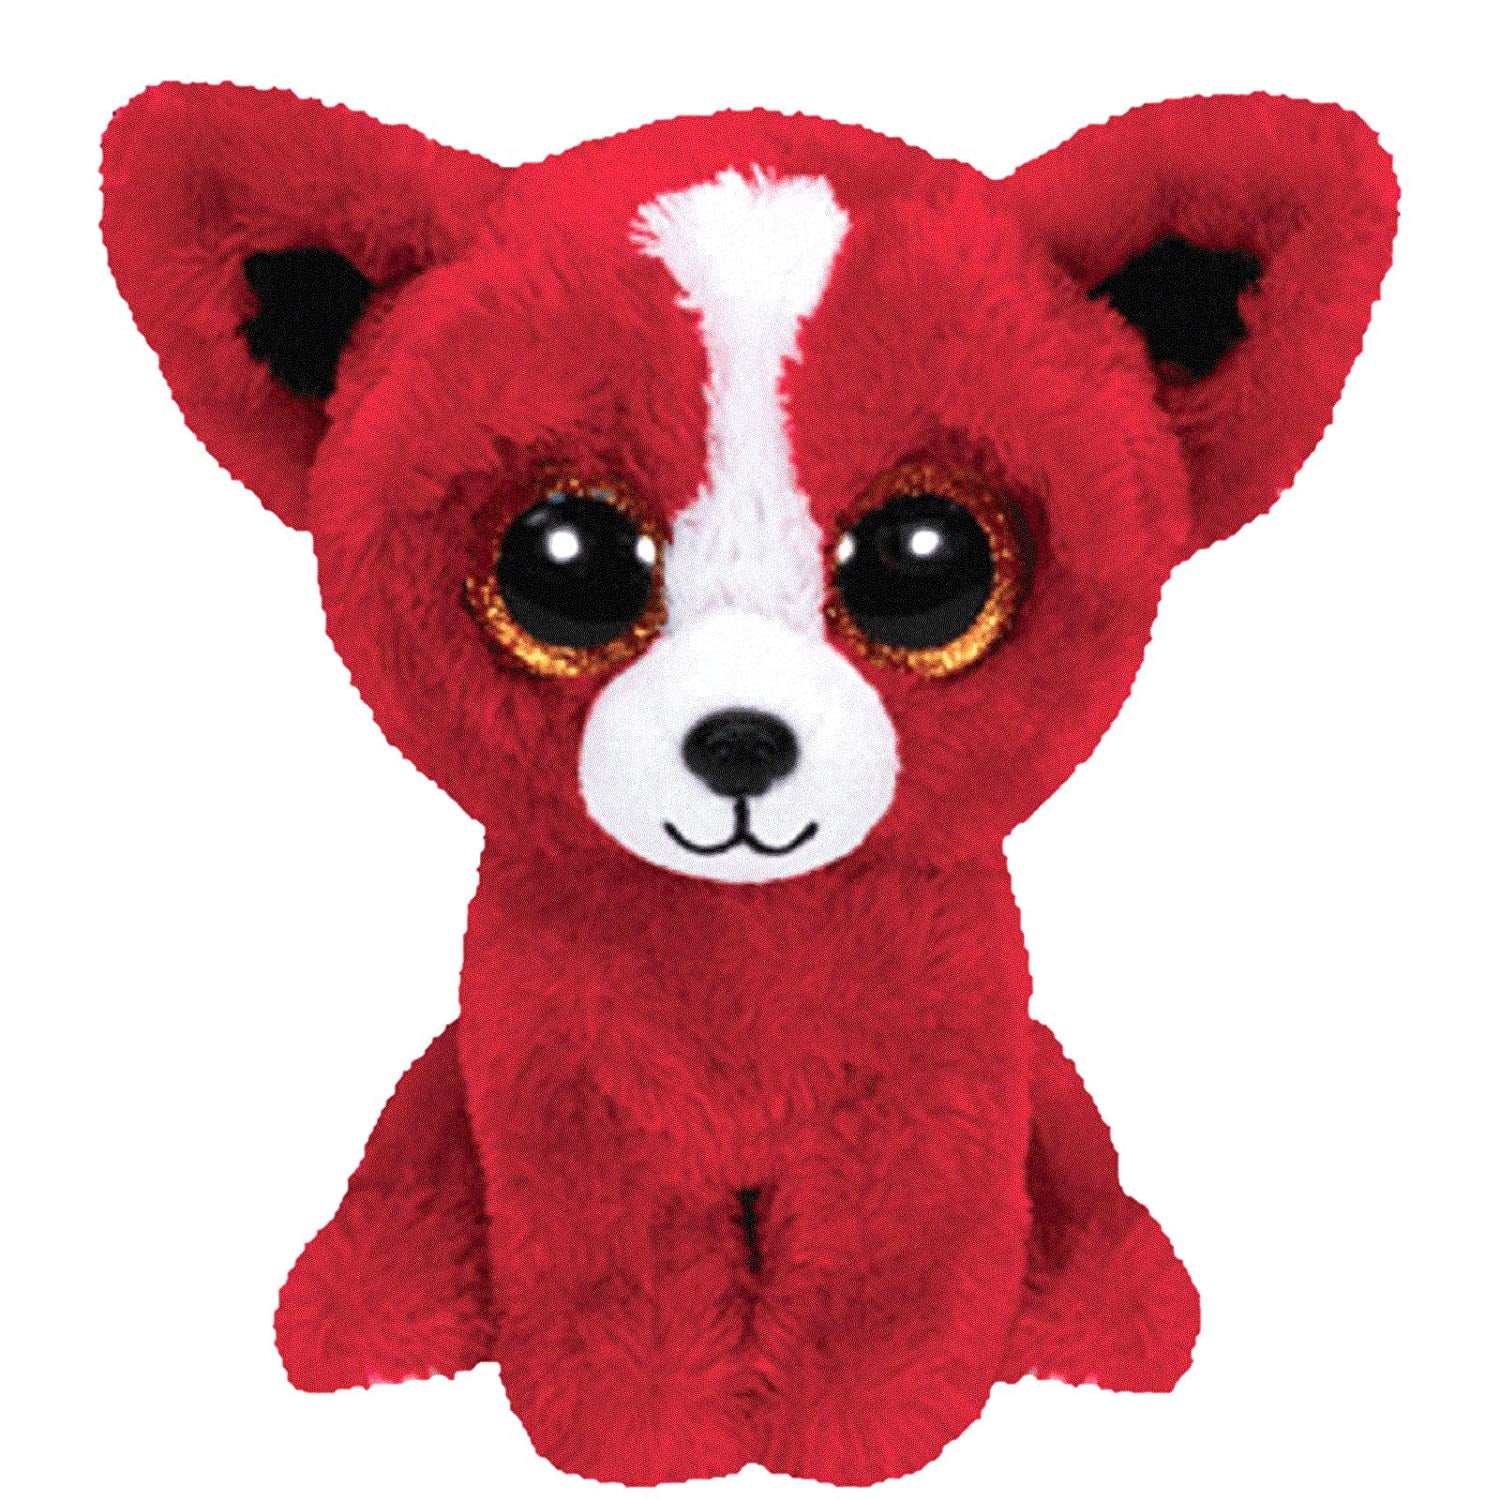 6 Inch NEW MWMT TOMATO the Red Dog Ty Beanie Boos Gift Show Exclusive 